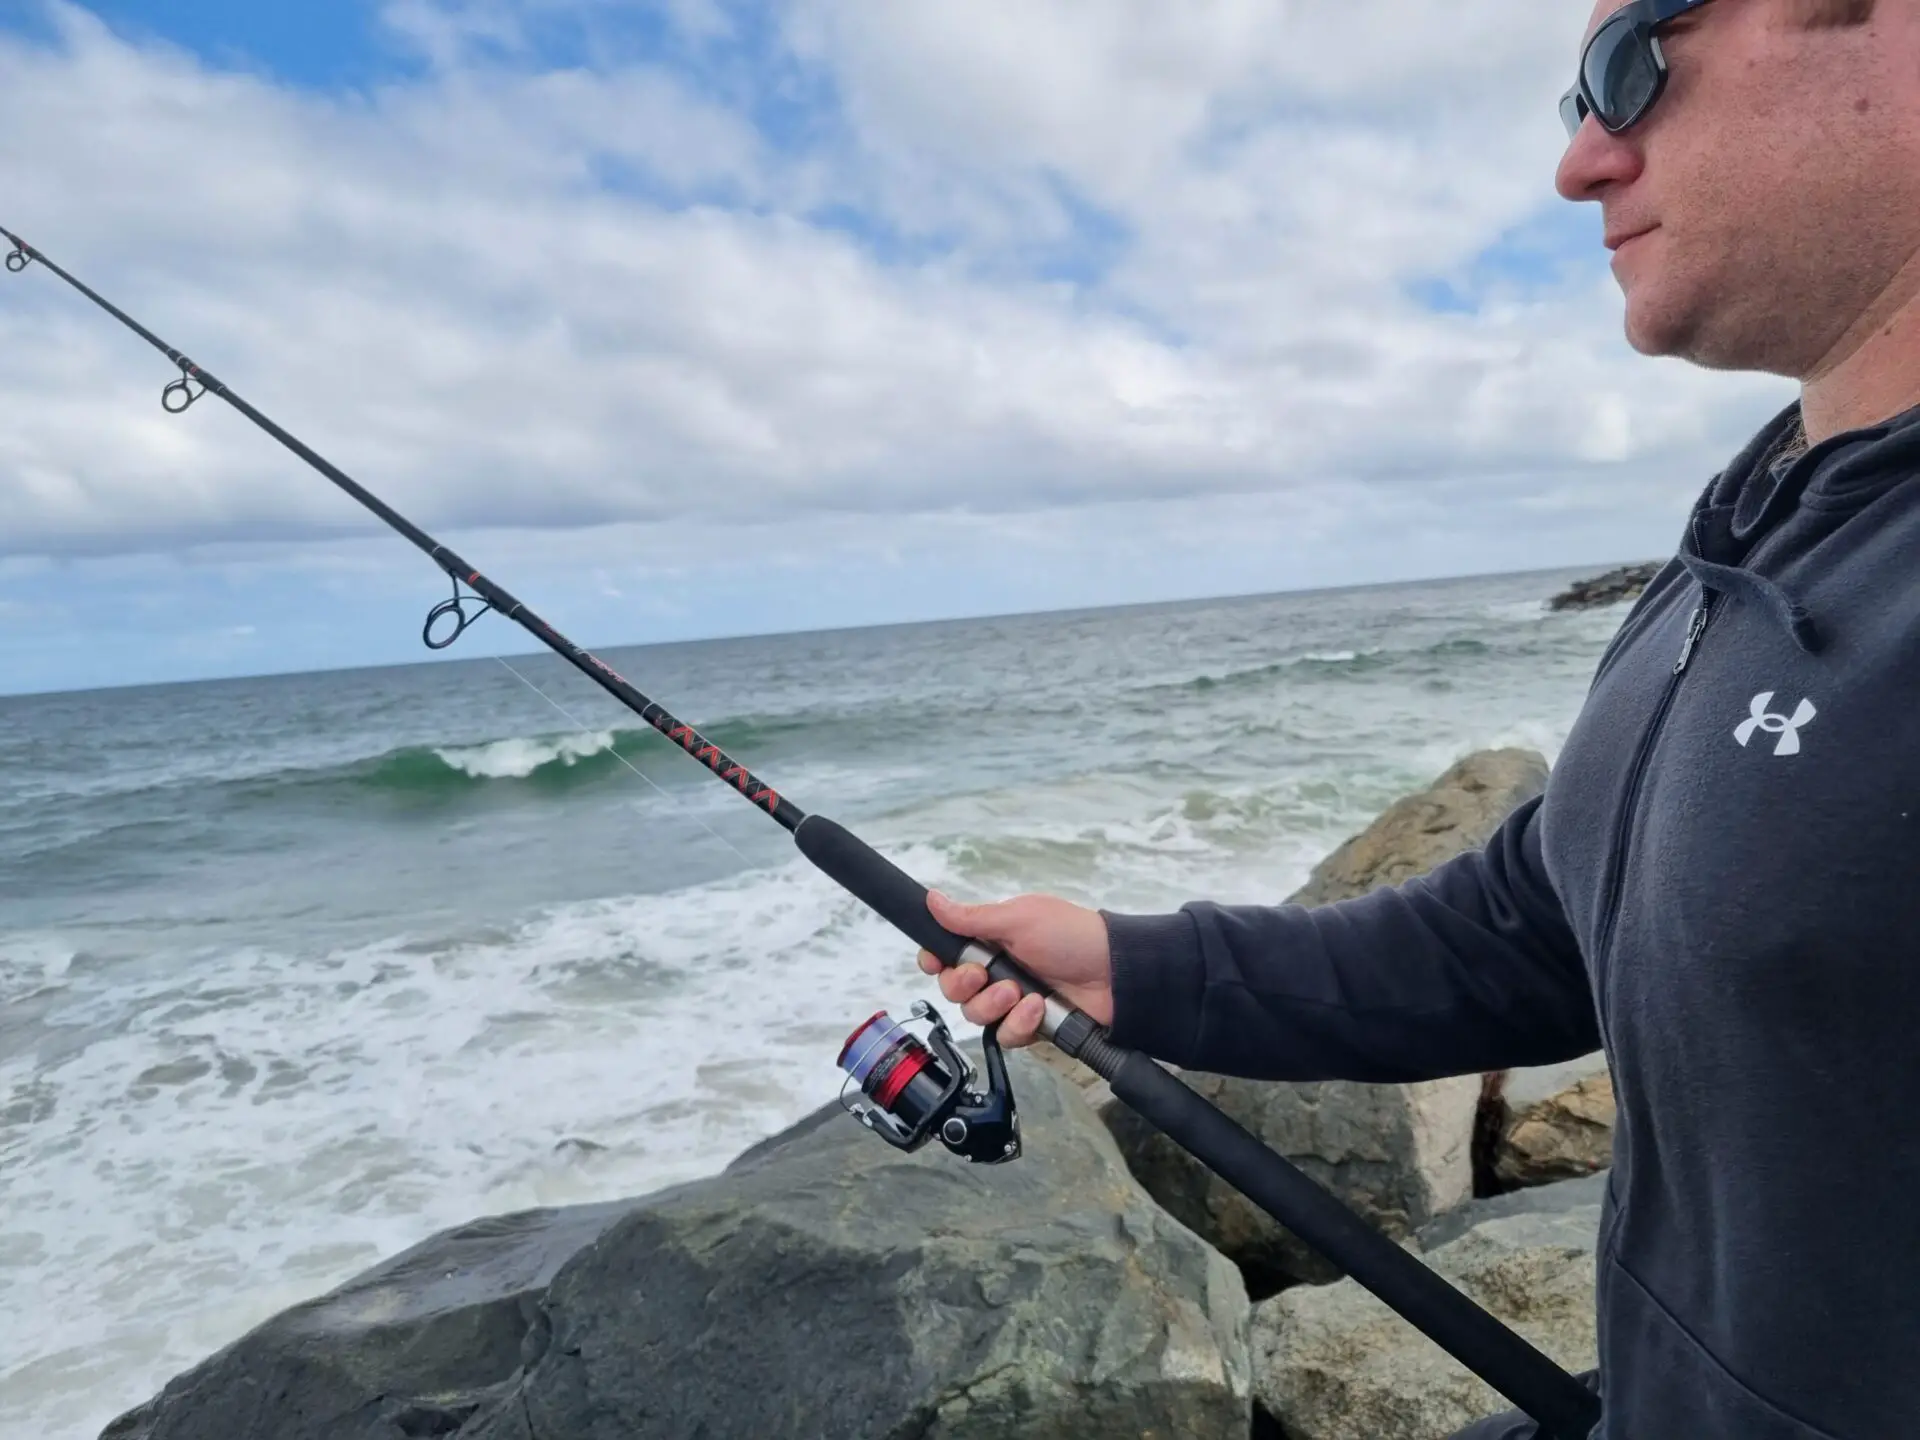 Russ Egan testing out a Shimano Sienna FG 4000 reel with an Ugly Stik Platinum rod fishing in the ocean from the shore